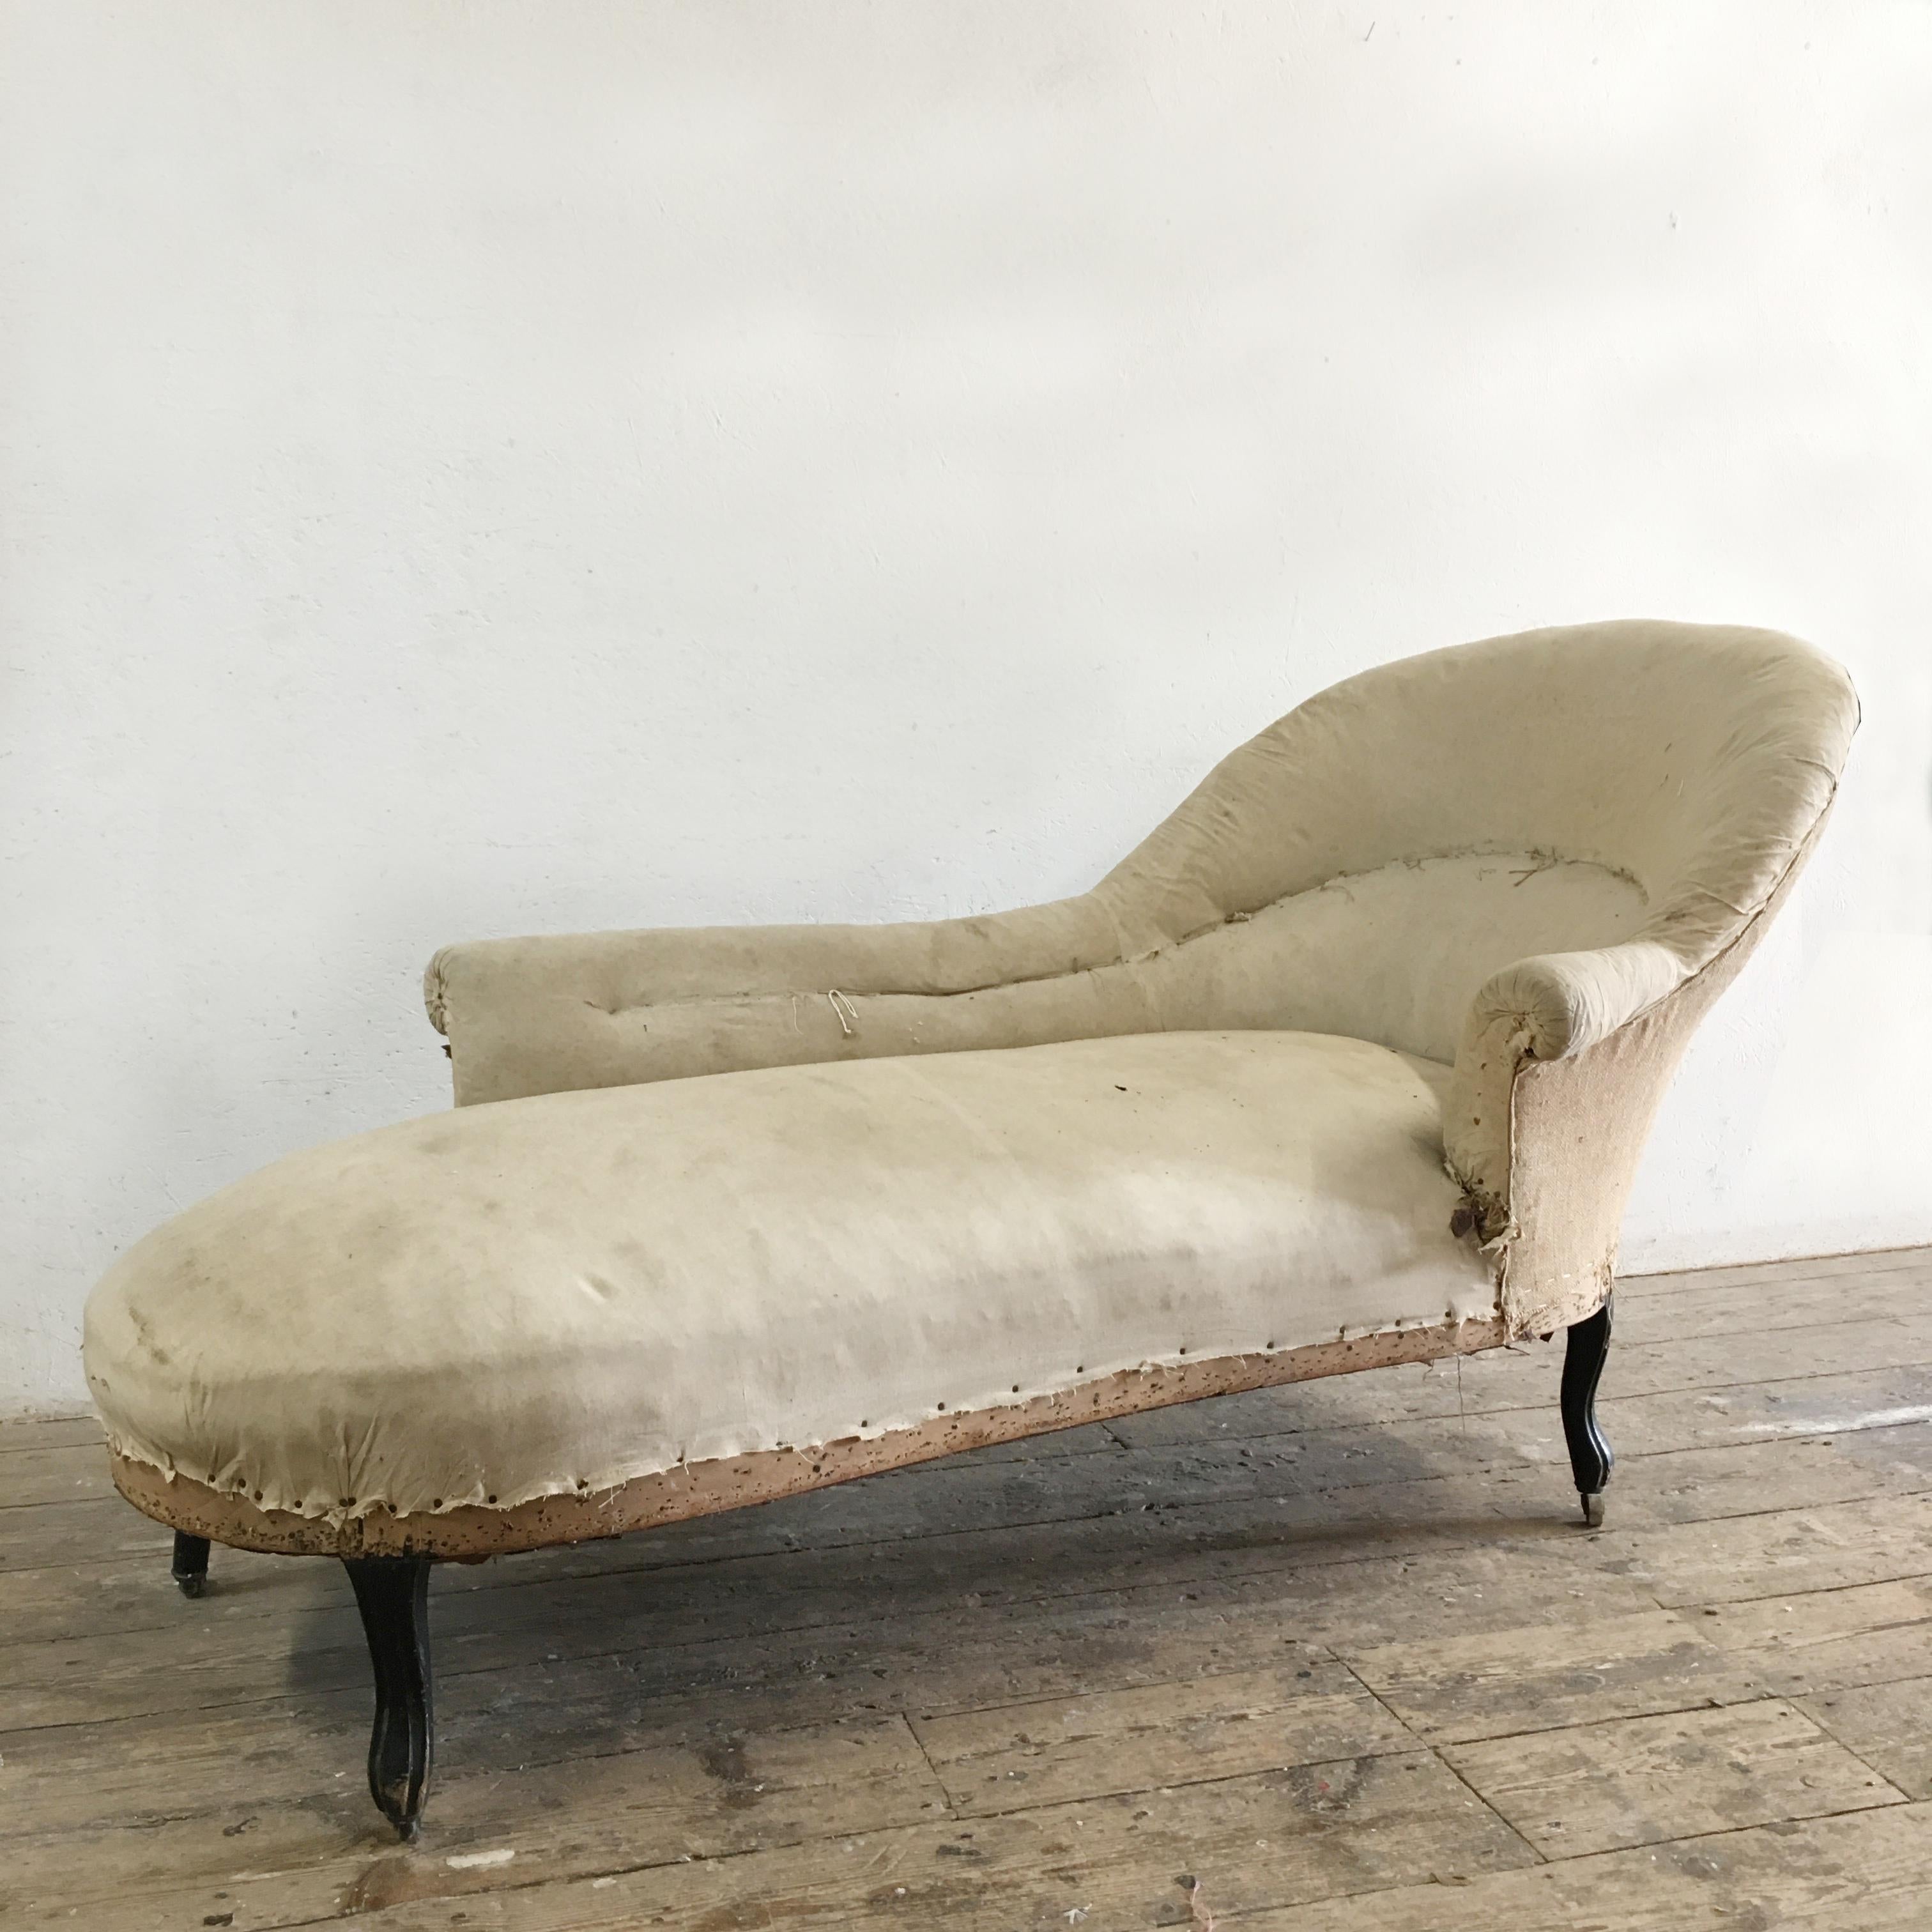 Antique French Napoleon III Chaise Longue 
Wonderful Shaping, Rarer Right Arm Facing (Raf)
Horse Hair/Seaweed Filling, Cotton Calico Overlay
Elegant Carved Ebonised Legs With A Castor On Each
175Cm Length, 89Cm Height, 74Cm Depth, 40Cm Seat